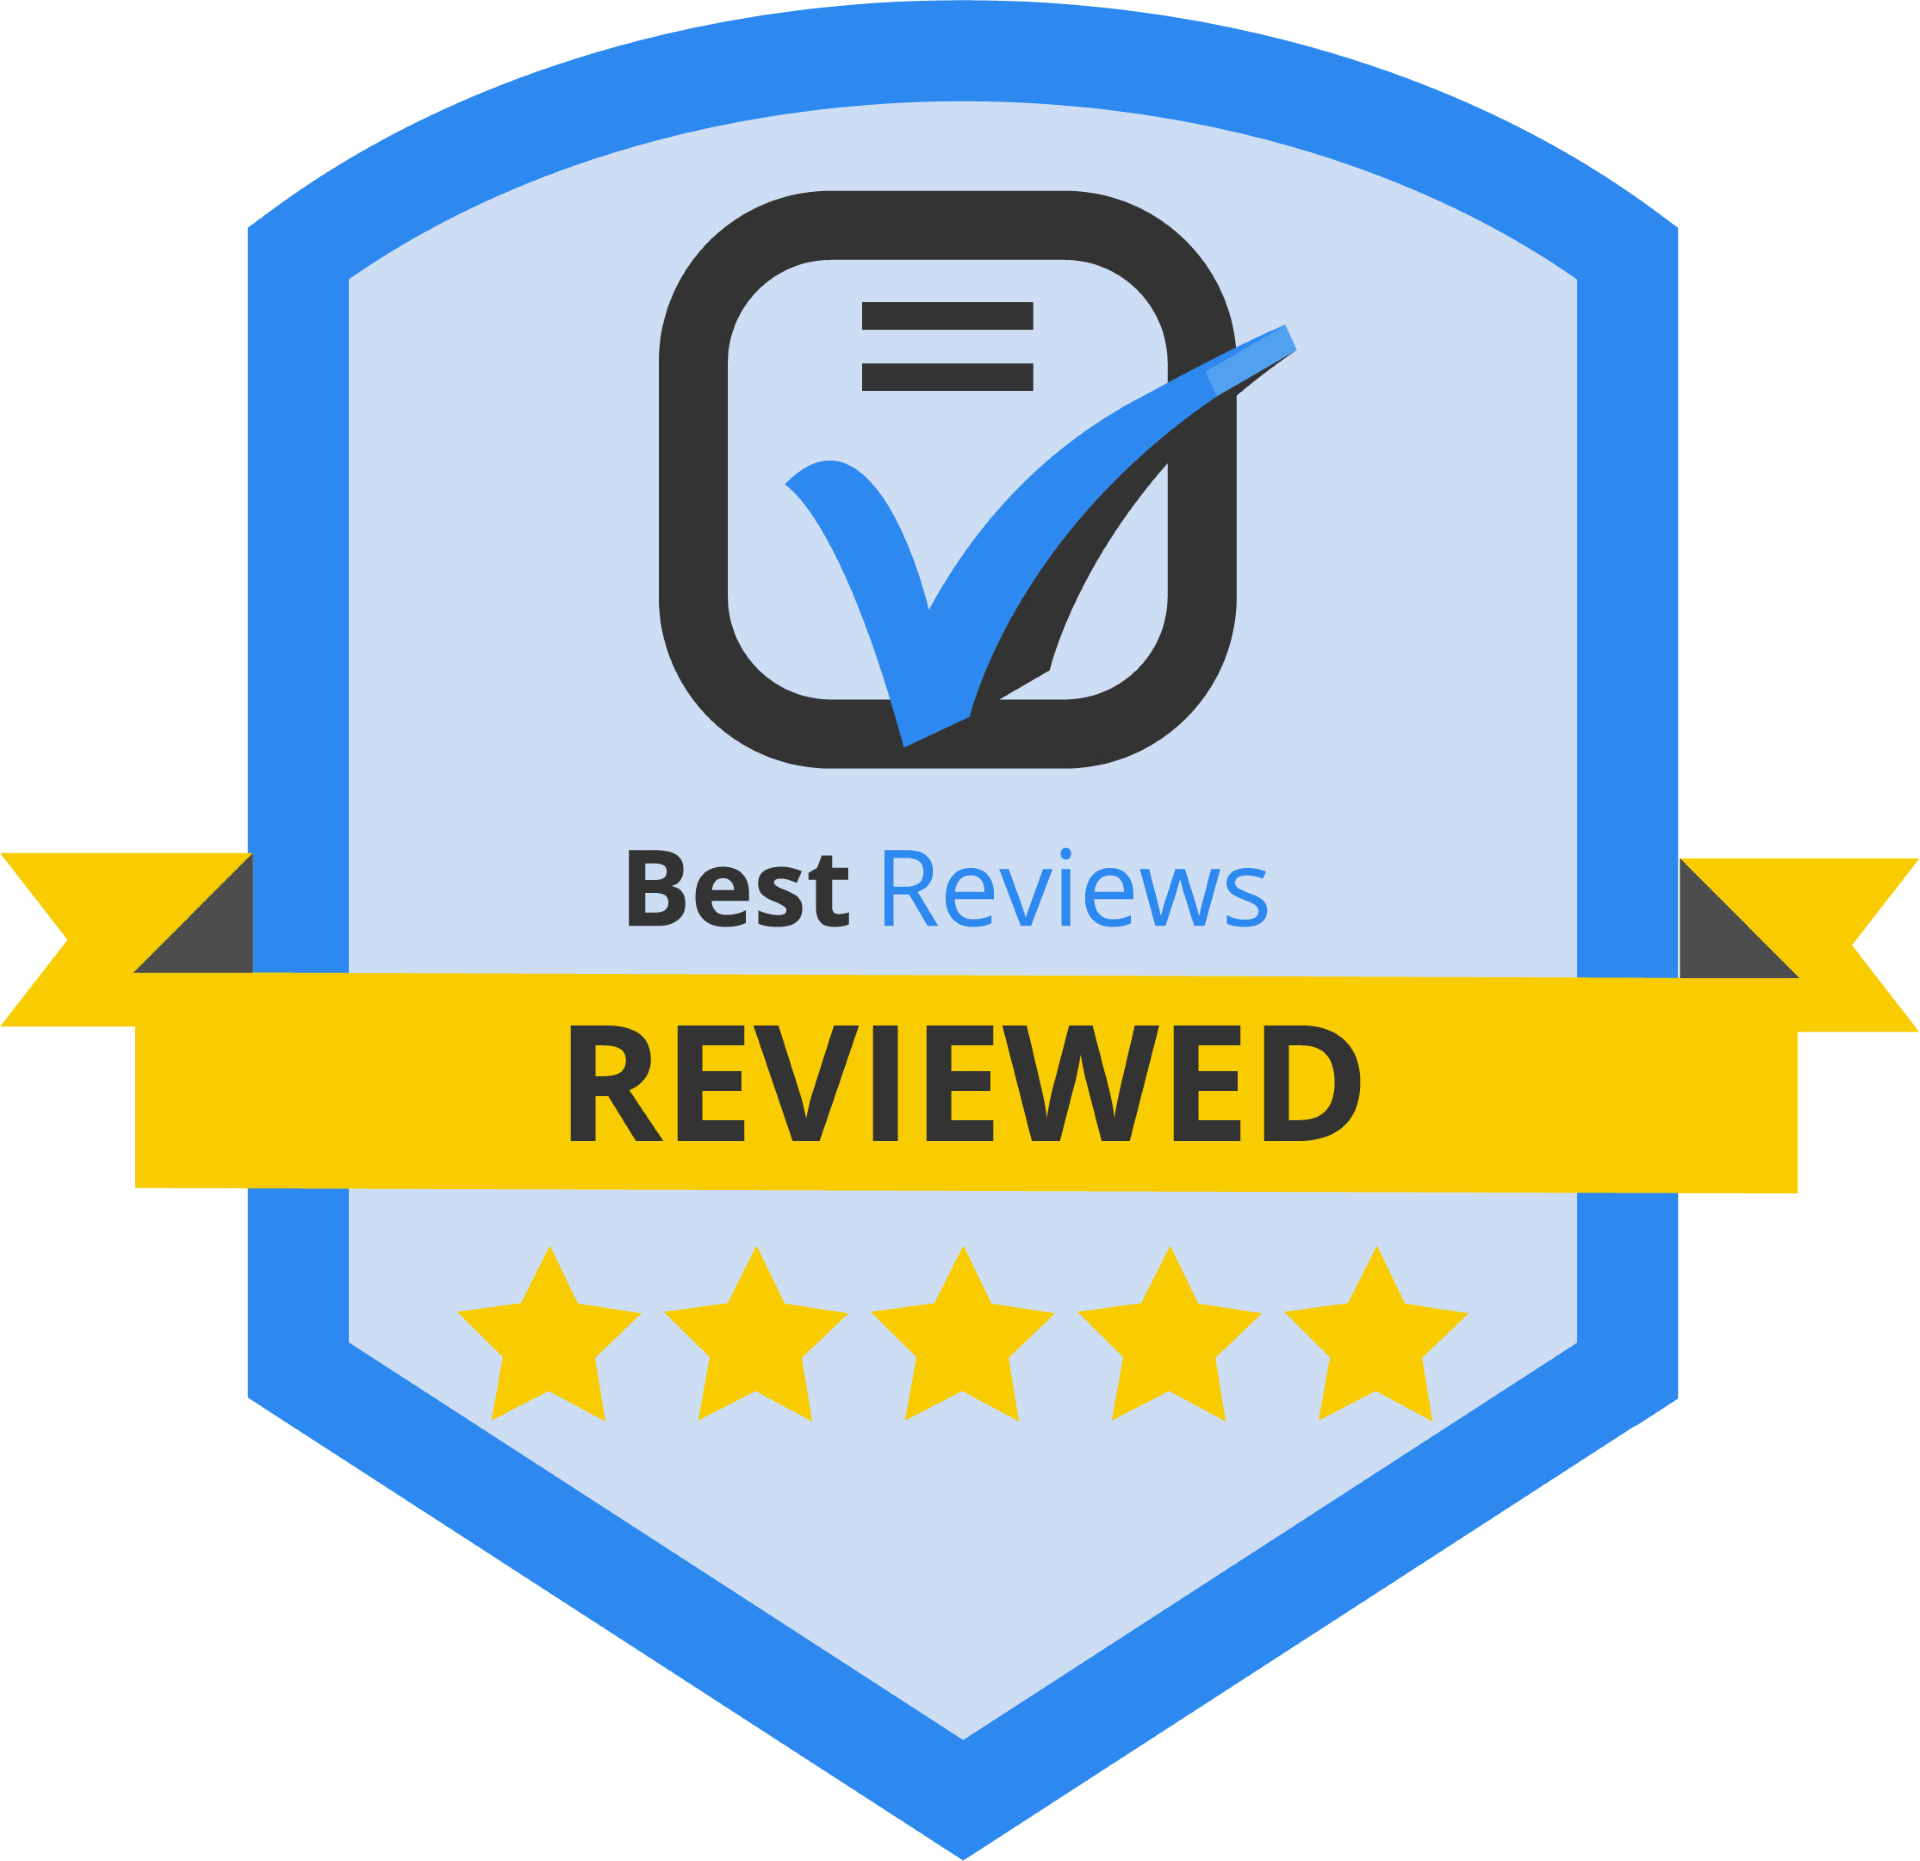 Reviewed and recommended by Best Reviews